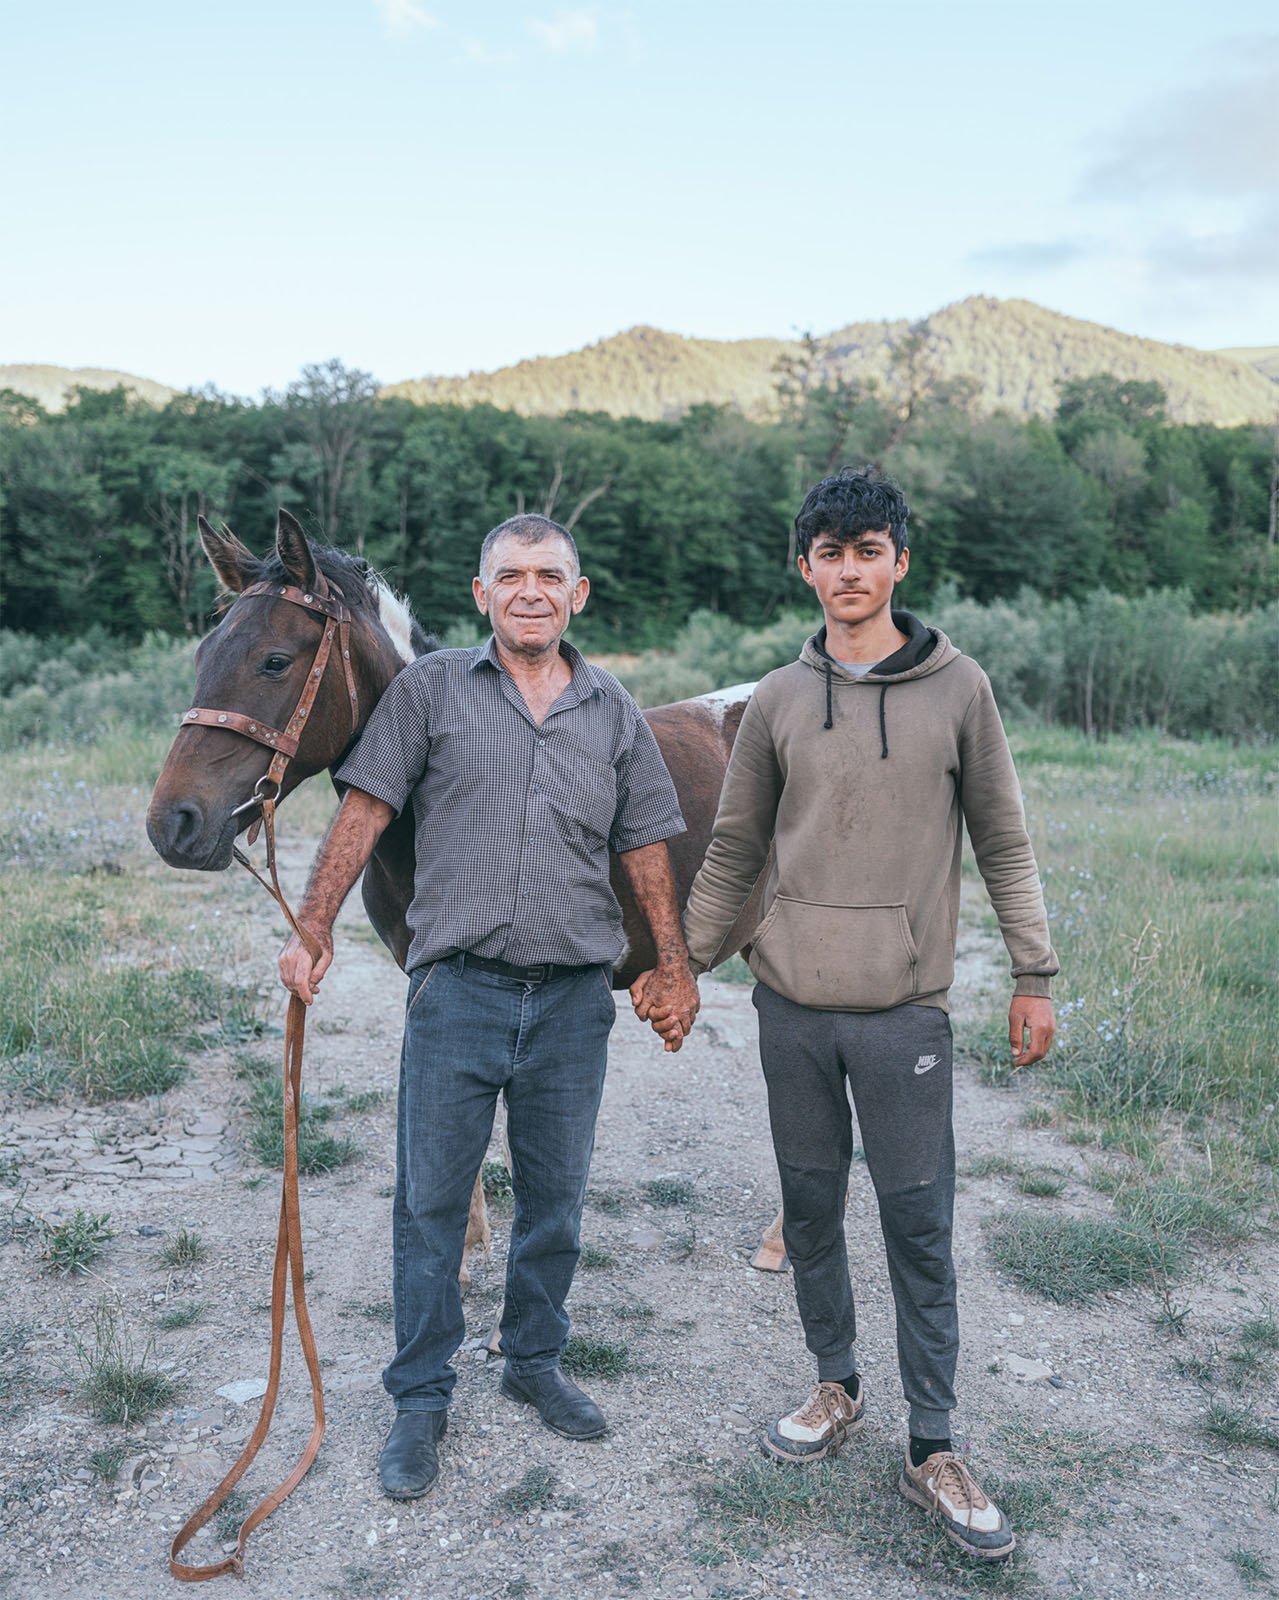 An elderly man and a young man hold hands, standing next to a brown horse in a natural setting with trees and a hill in the background. they both face the camera with subtle smiles.